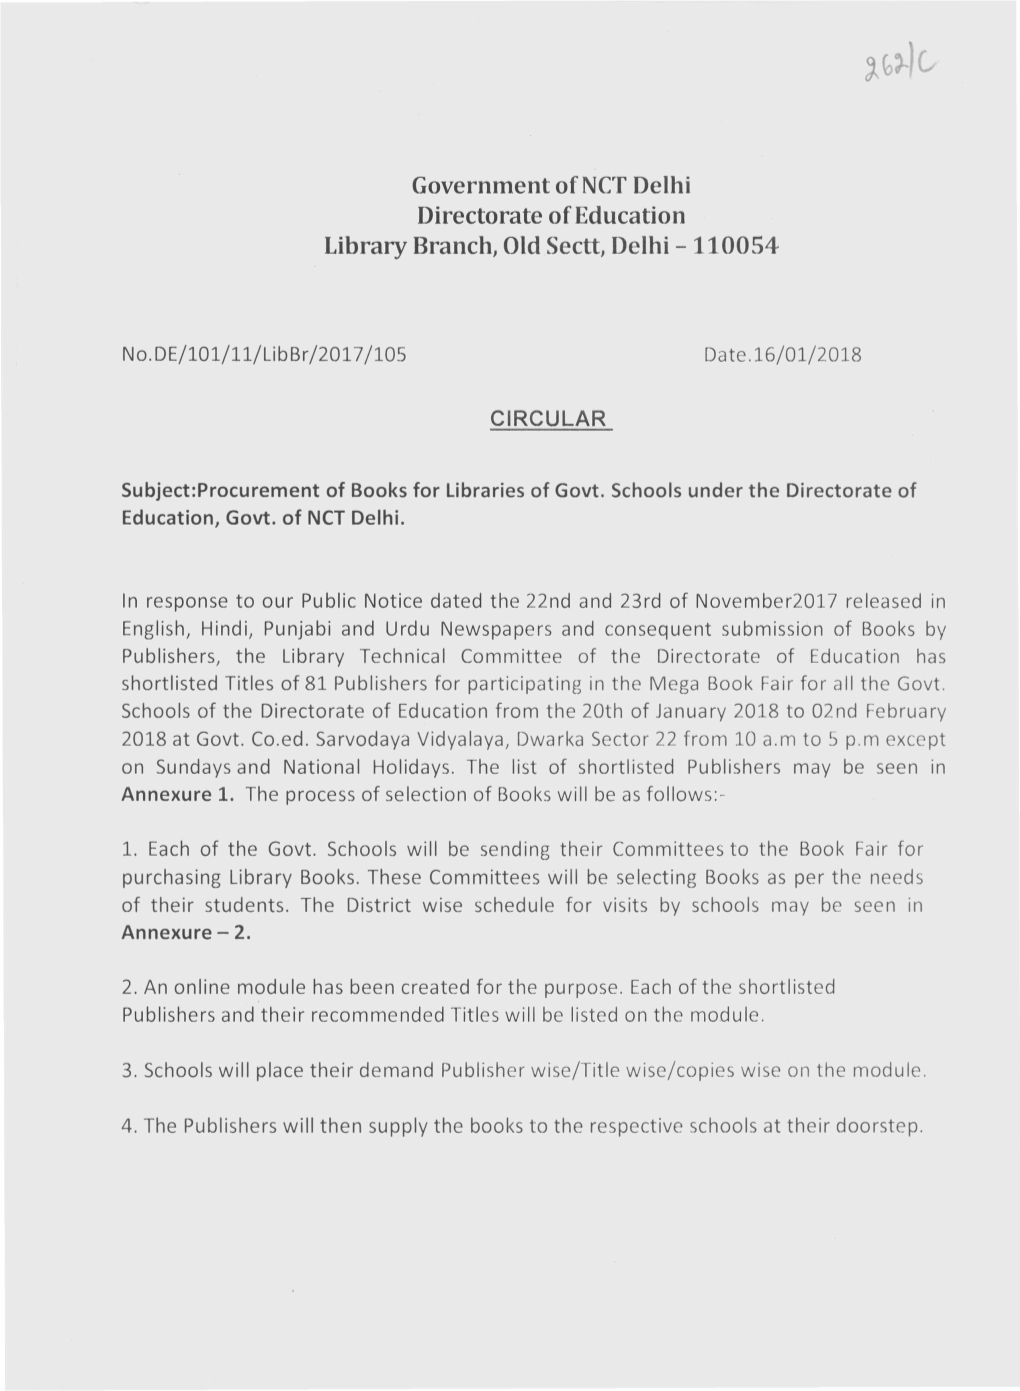 Government Ofnct Delhi Directorate of Education Library Branch, Old Sectt, Delhi -110054